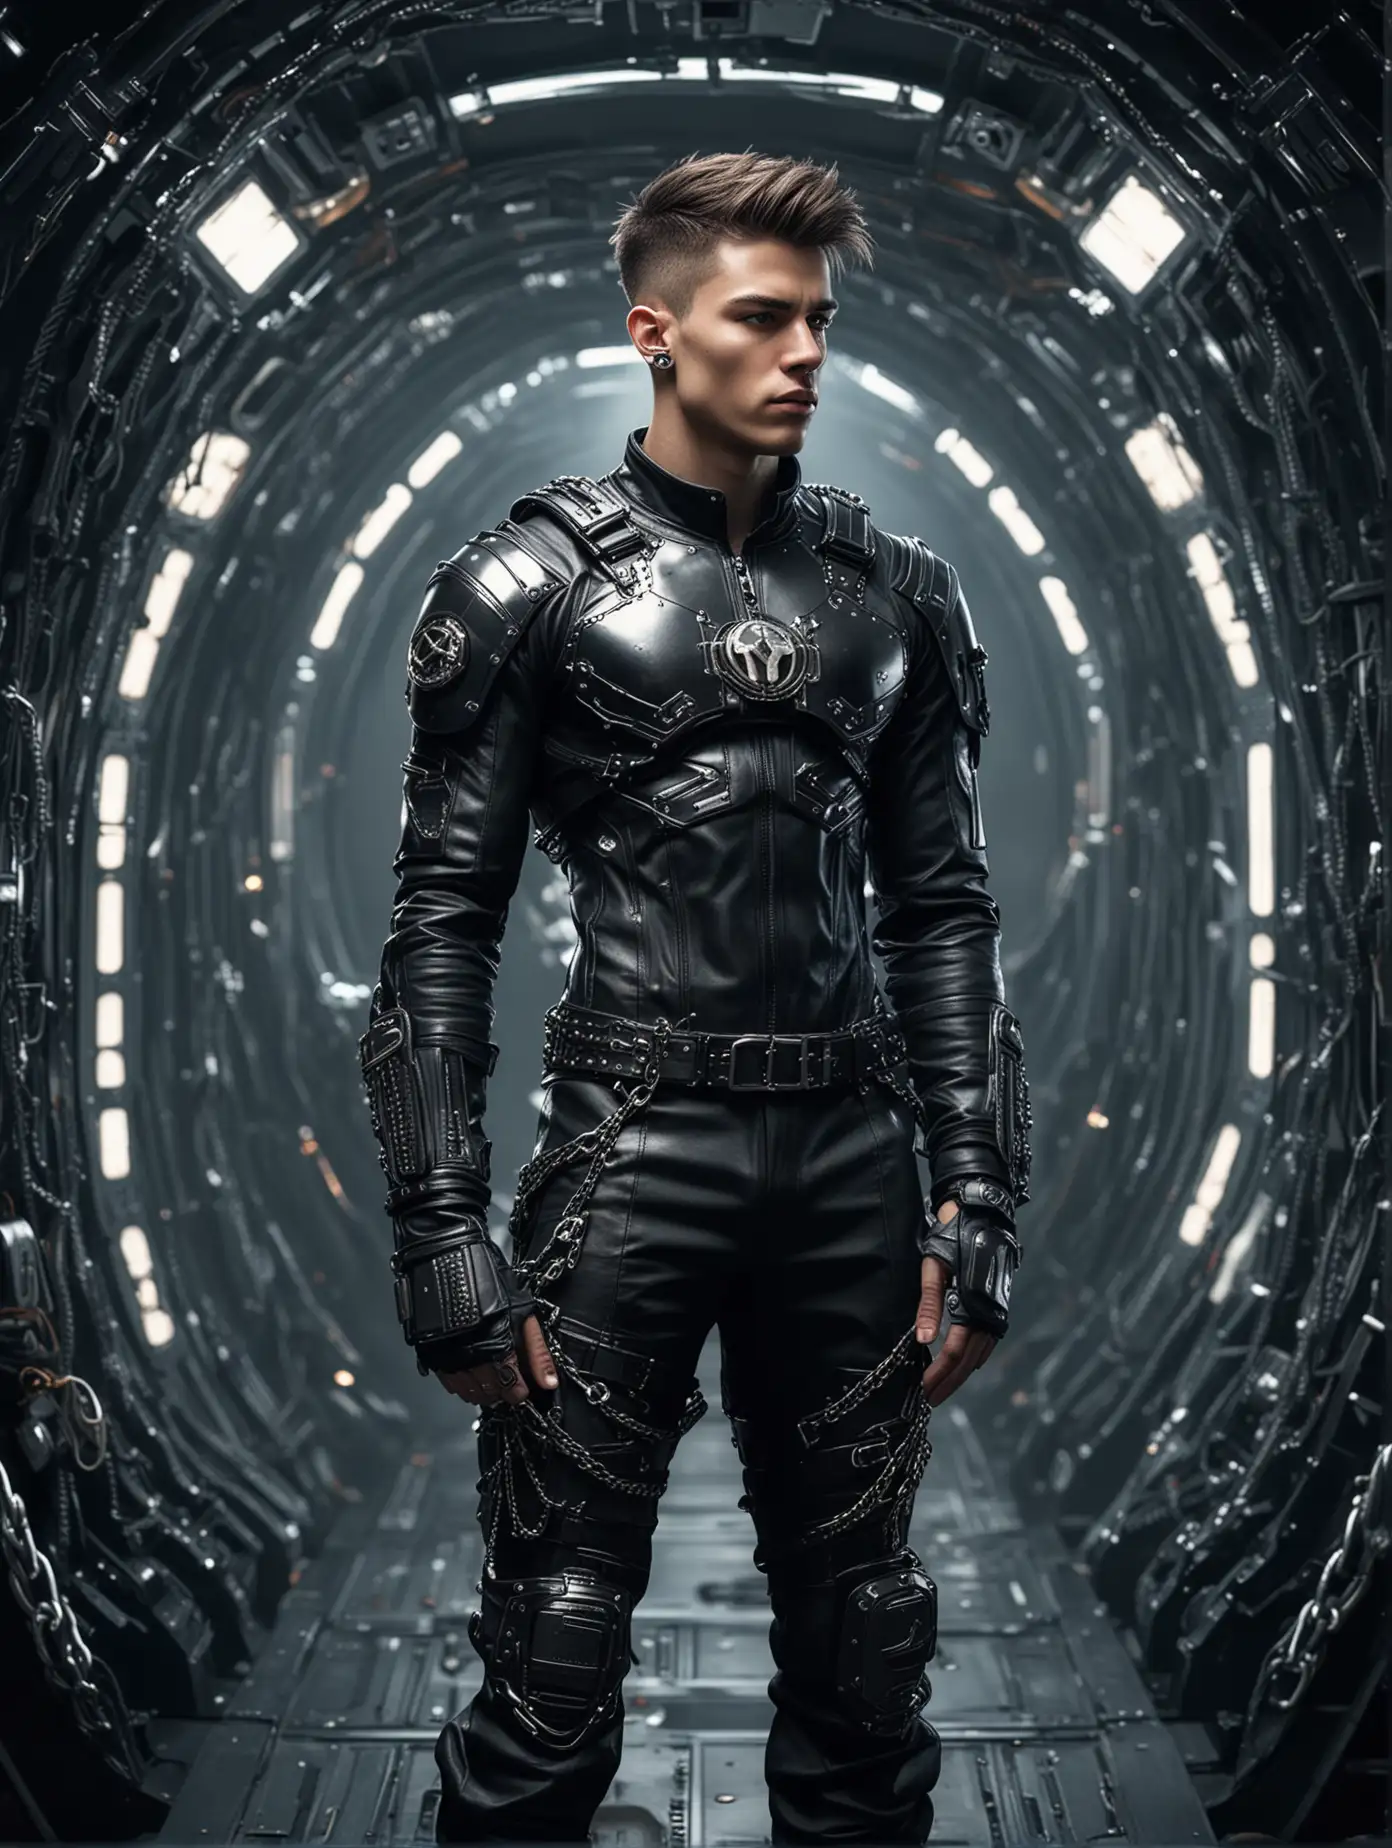 Full height image of muscular Young man, in form enhancing black leather space cadet uniform, chains and buckles details, futuristic logo on chest,   inside spacecraft in a cyberpunk world,